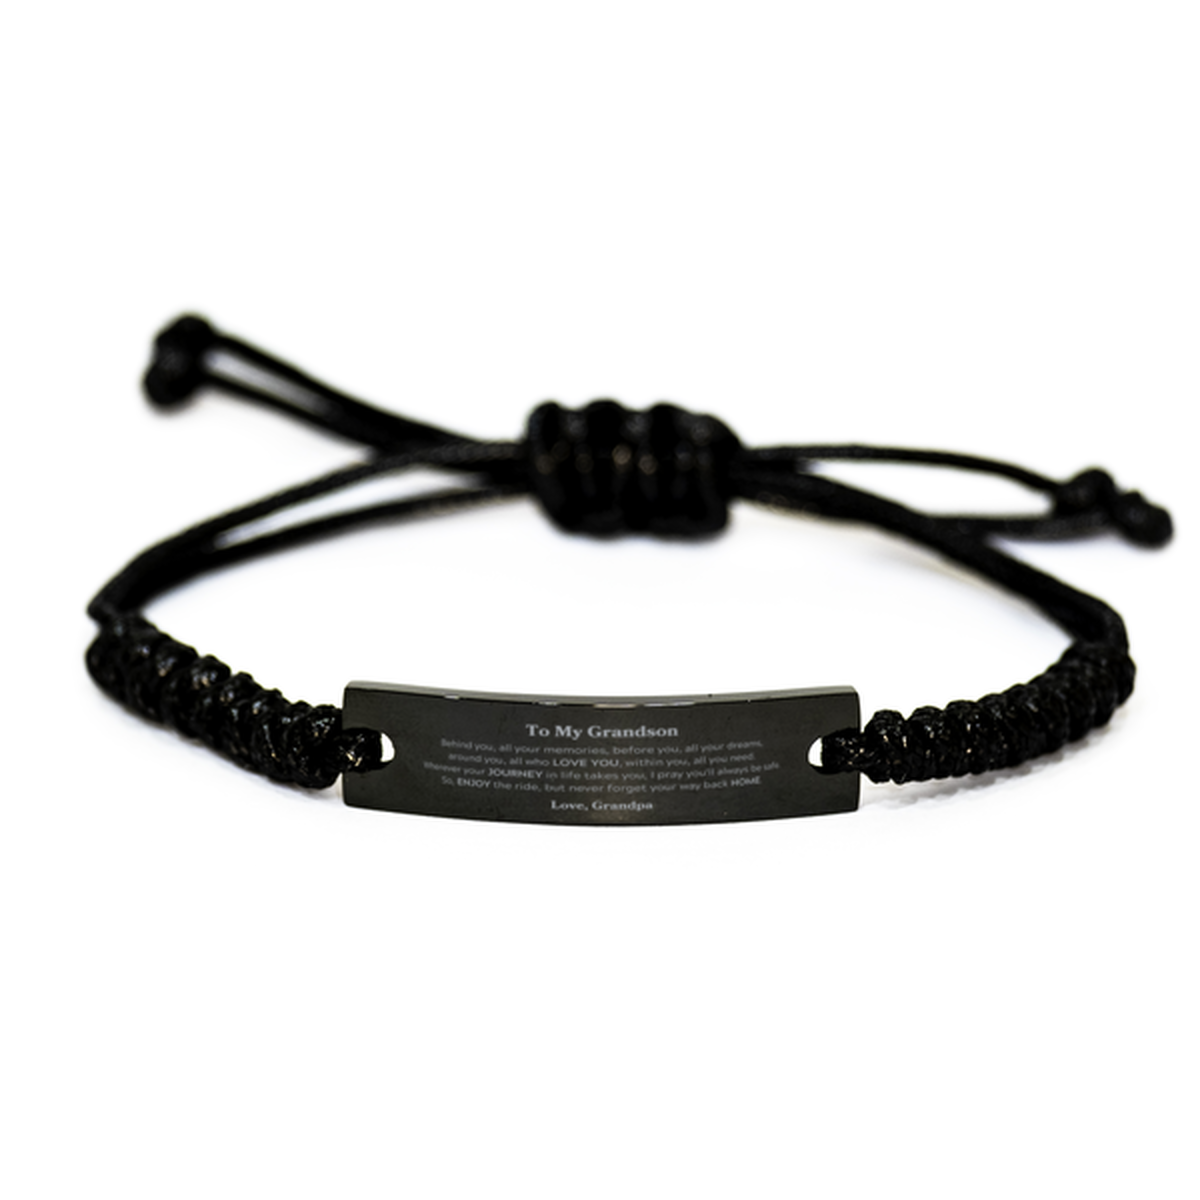 To My Grandson Graduation Gifts from Grandpa, Grandson Black Rope Bracelet Christmas Birthday Gifts for Grandson Behind you, all your memories, before you, all your dreams. Love, Grandpa